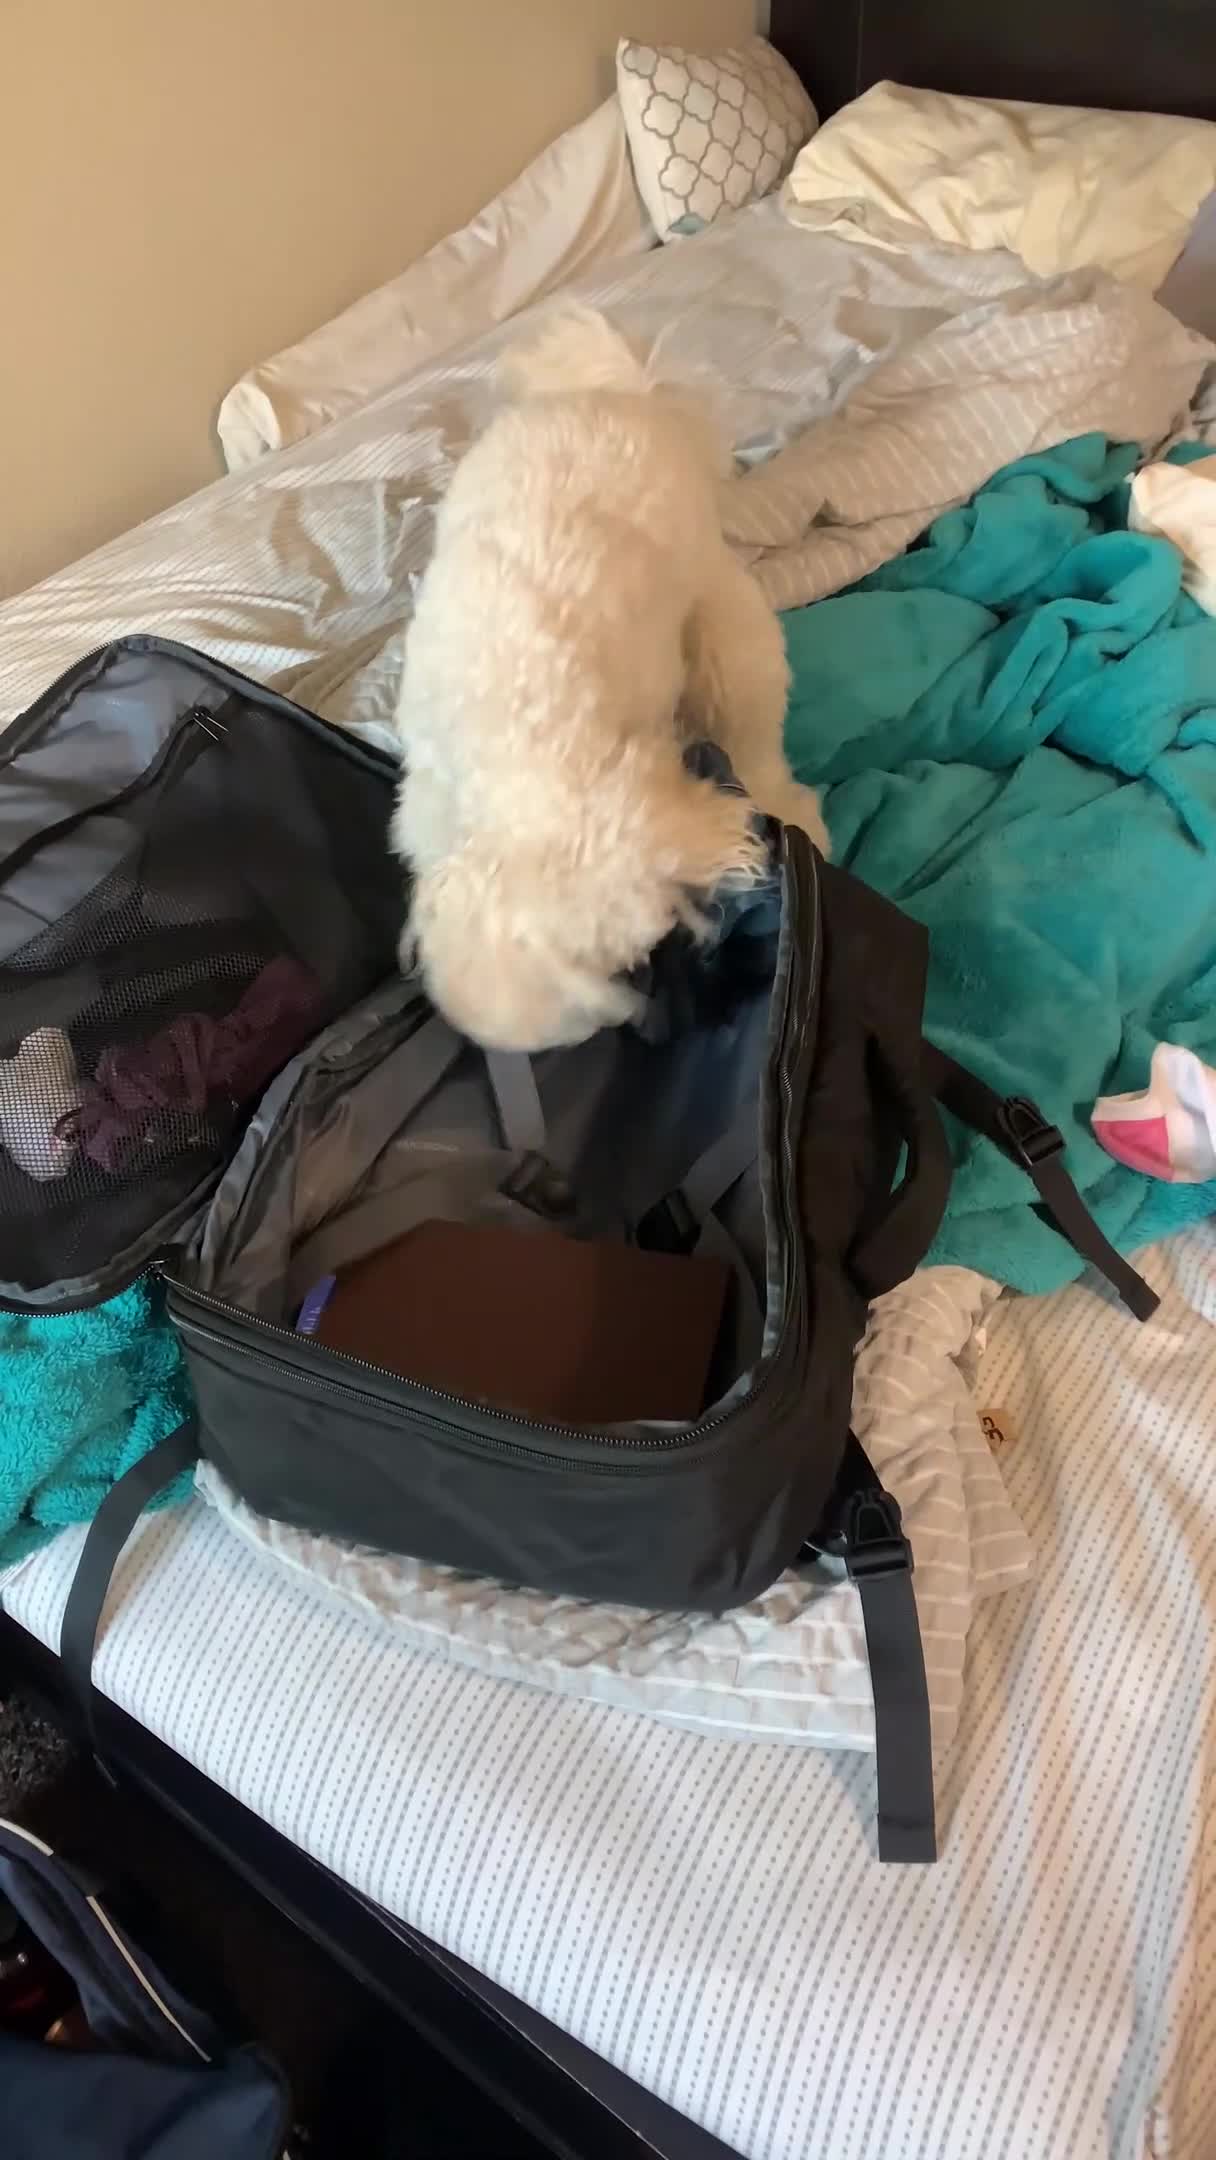 Dog Scratches Suitcase While His Owner Packs